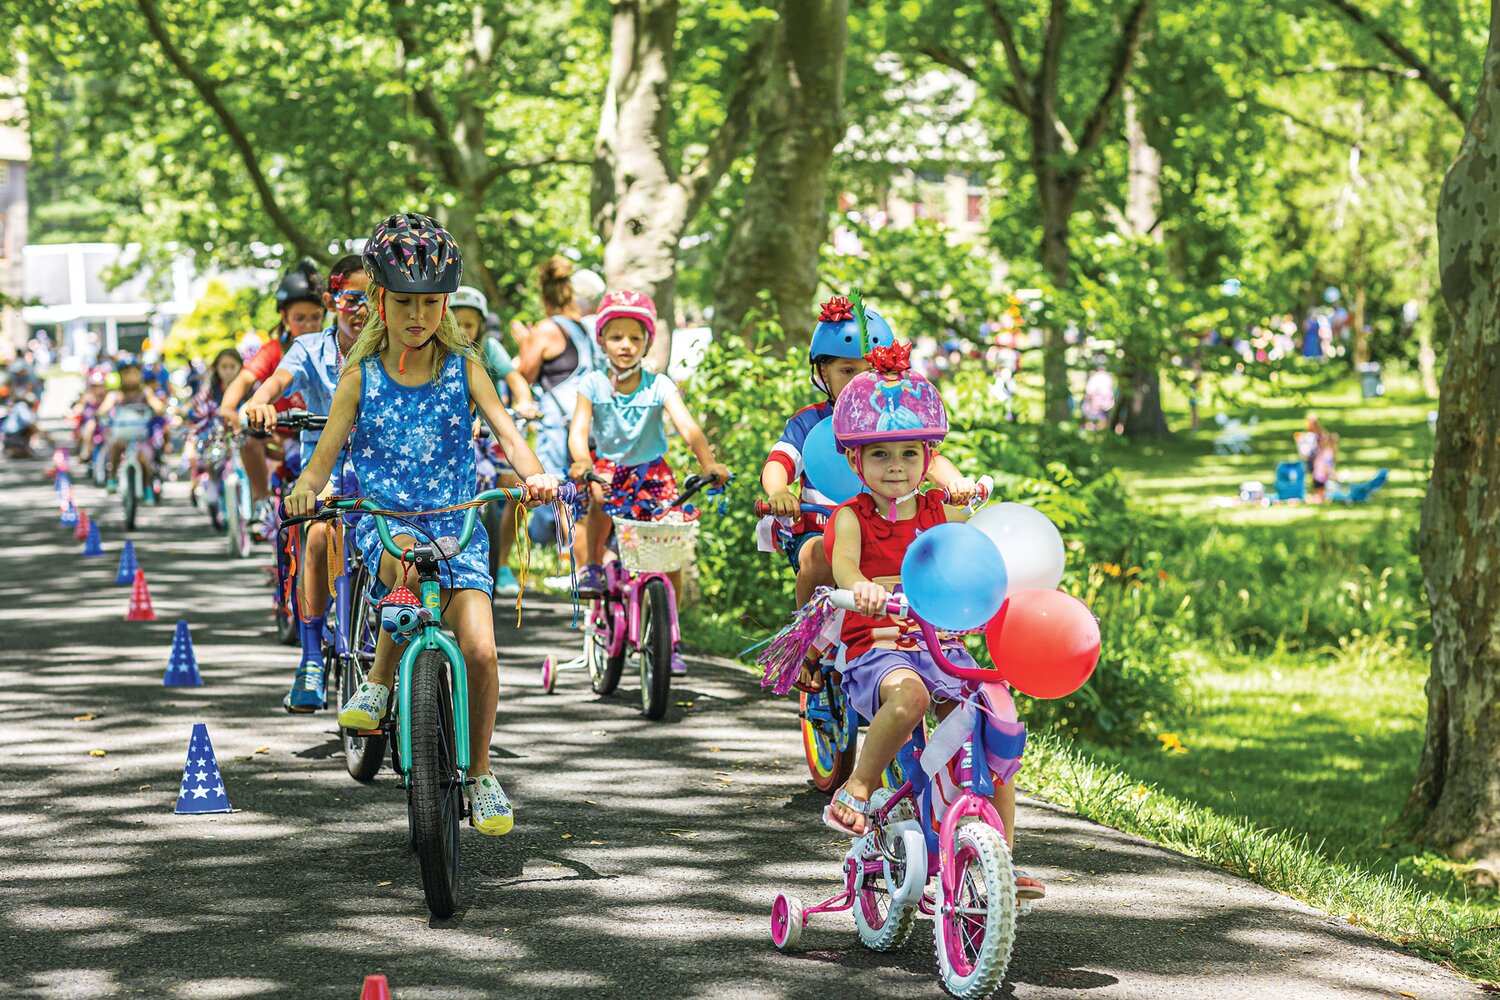 Children take part in the annual Decorated Bicycle Parade during last year’s Fonthill Castle 4th of July event.